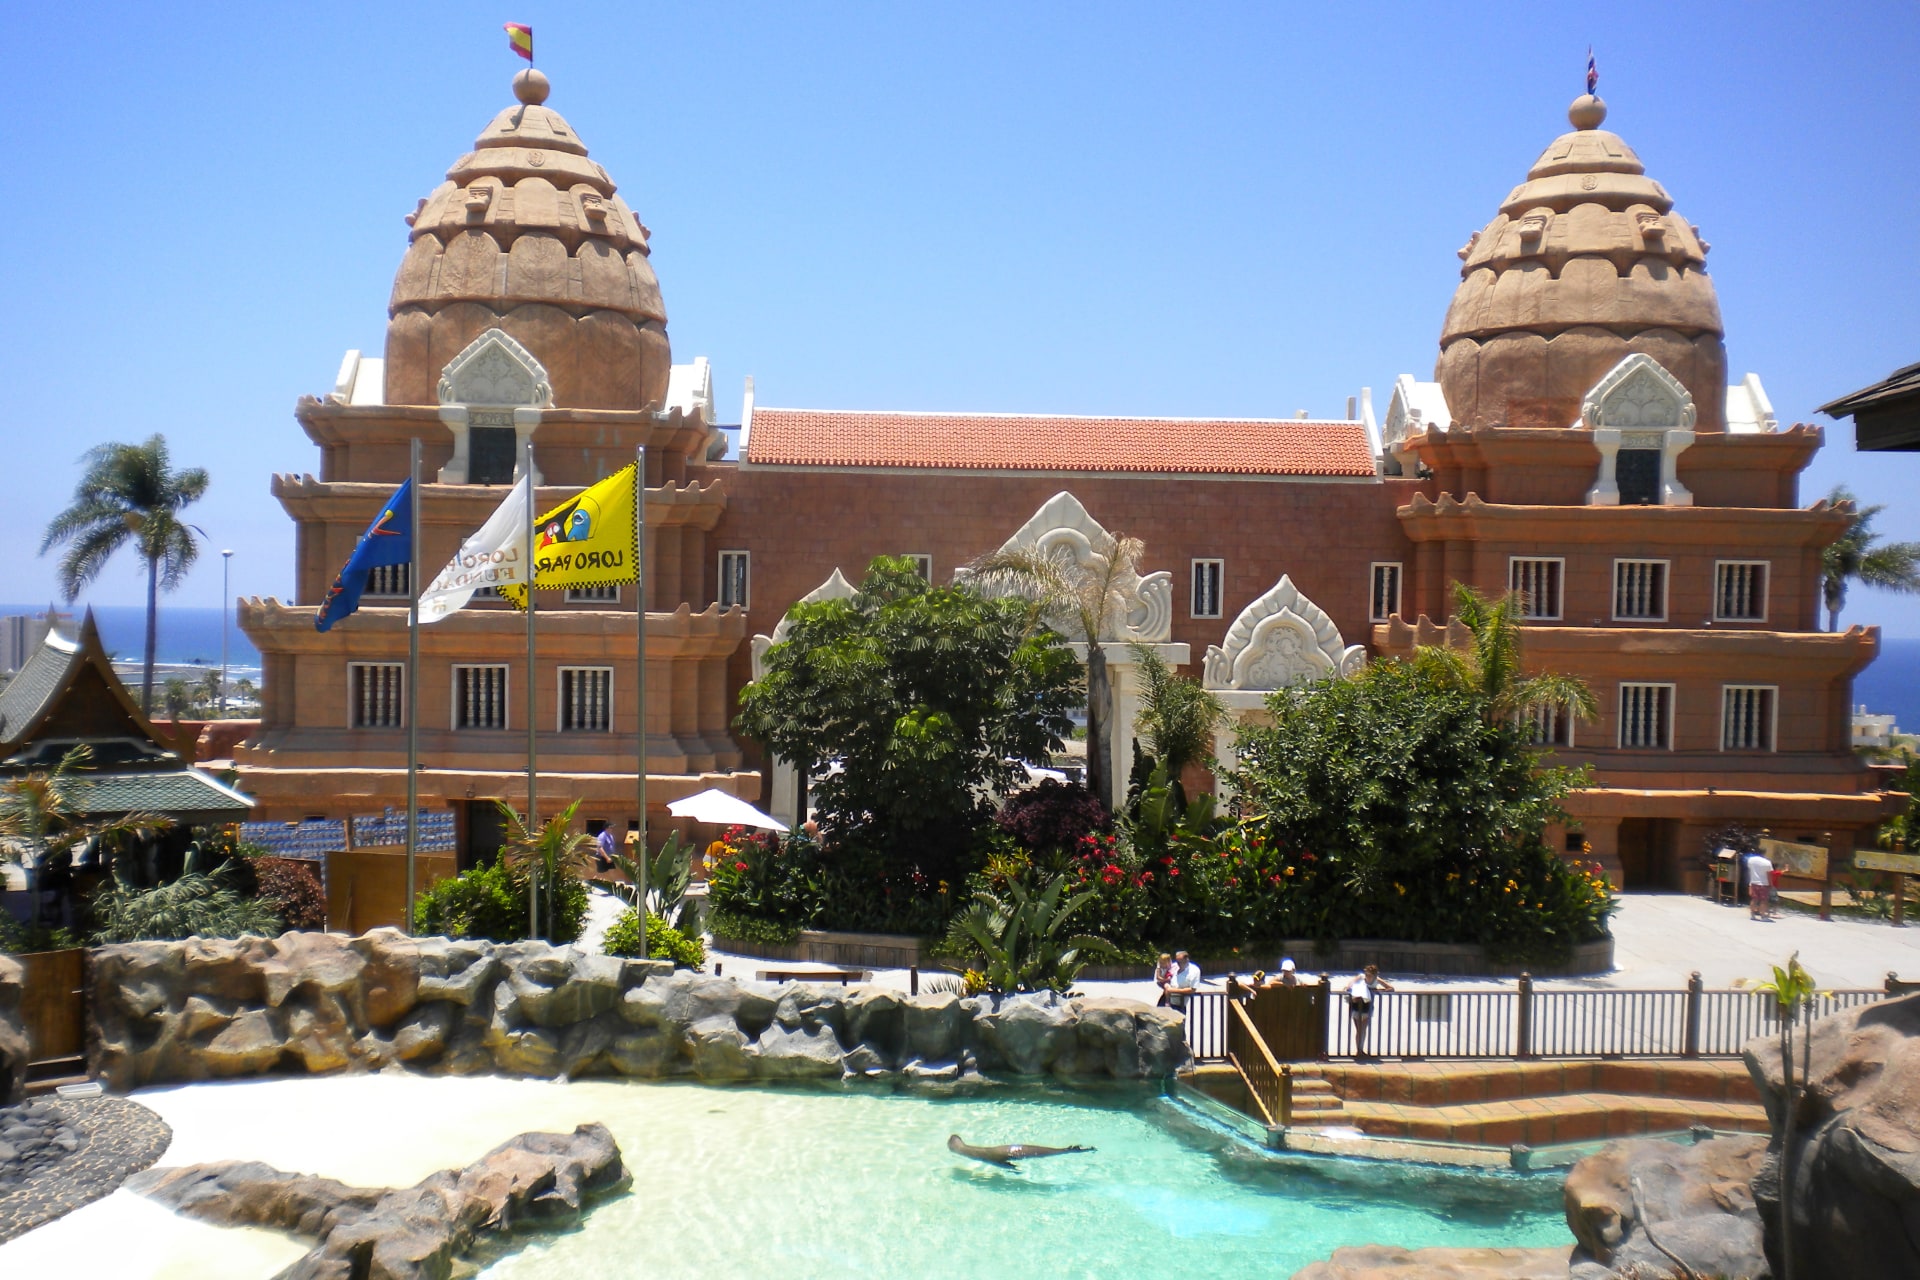 Inviting entrance area of Siam Park, Tenerife, welcoming visitors with its vibrant and tropical ambiance